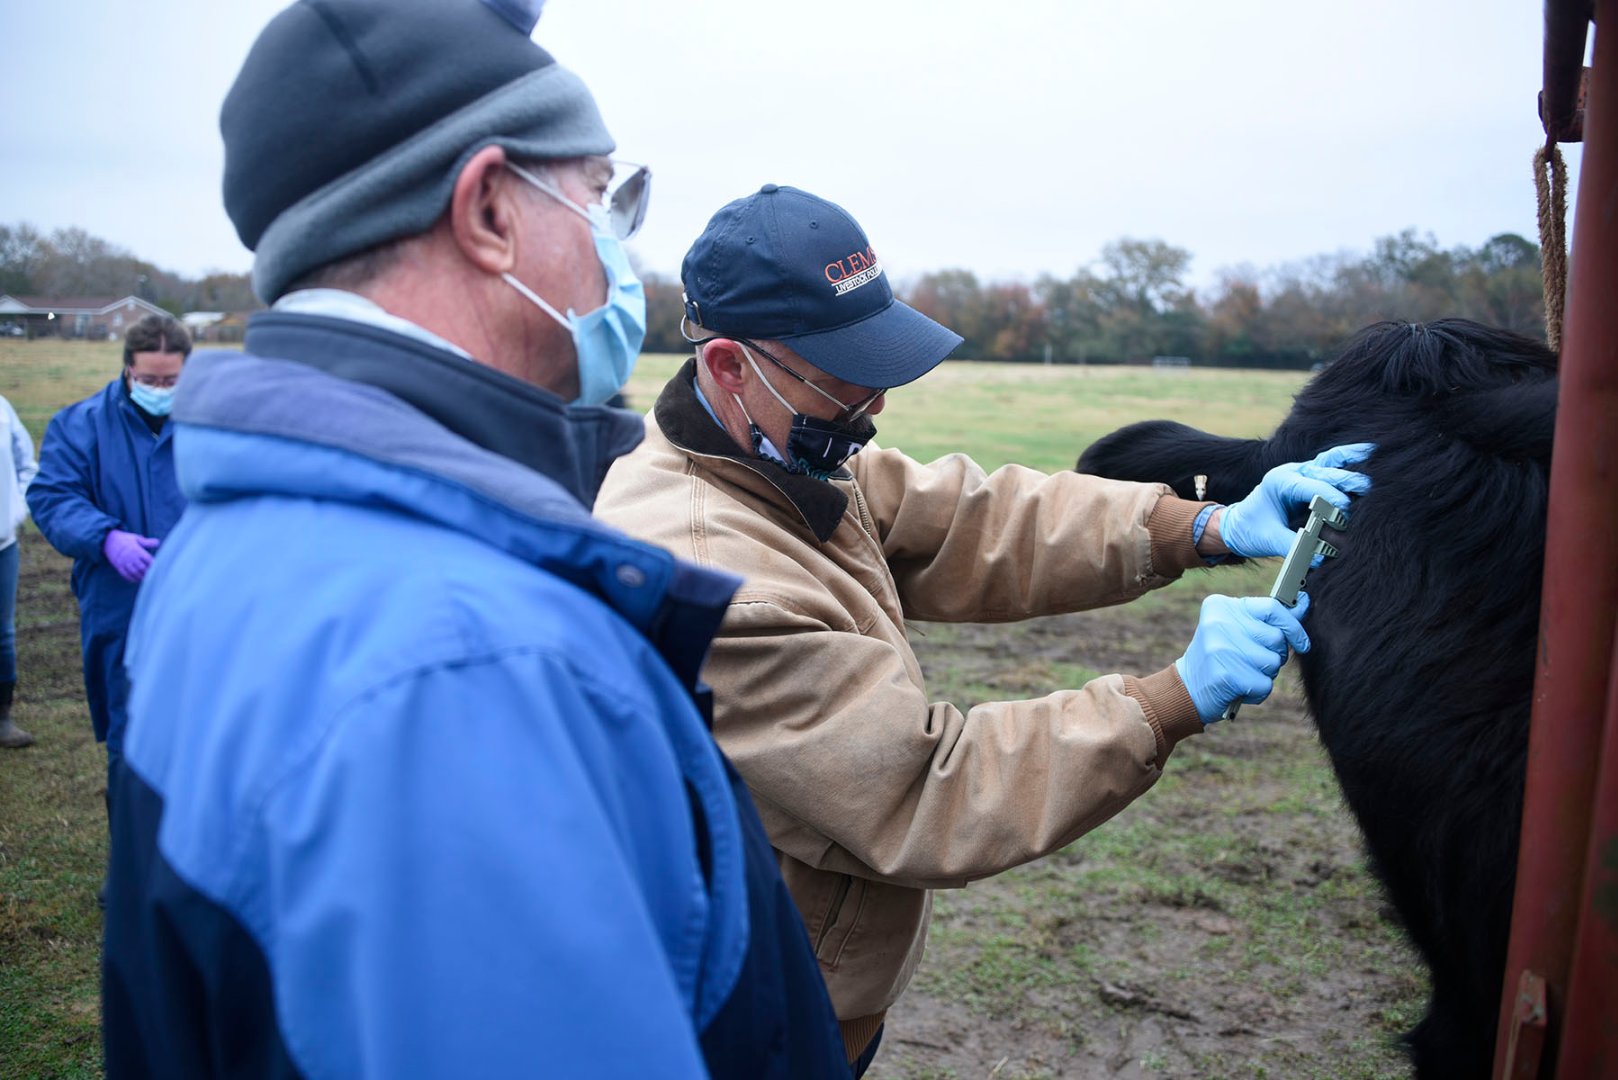 Dr. Sean Eastman, director of field services for Clemson University’s Livestock Poultry Health, uses a caliper on a cow as a part of the tuberculosis testing protocol. Overseeing the technique is Dr. Michael Whicker, certified trainer with the U.S. Department of Agriculture’s Veterinary Services. 